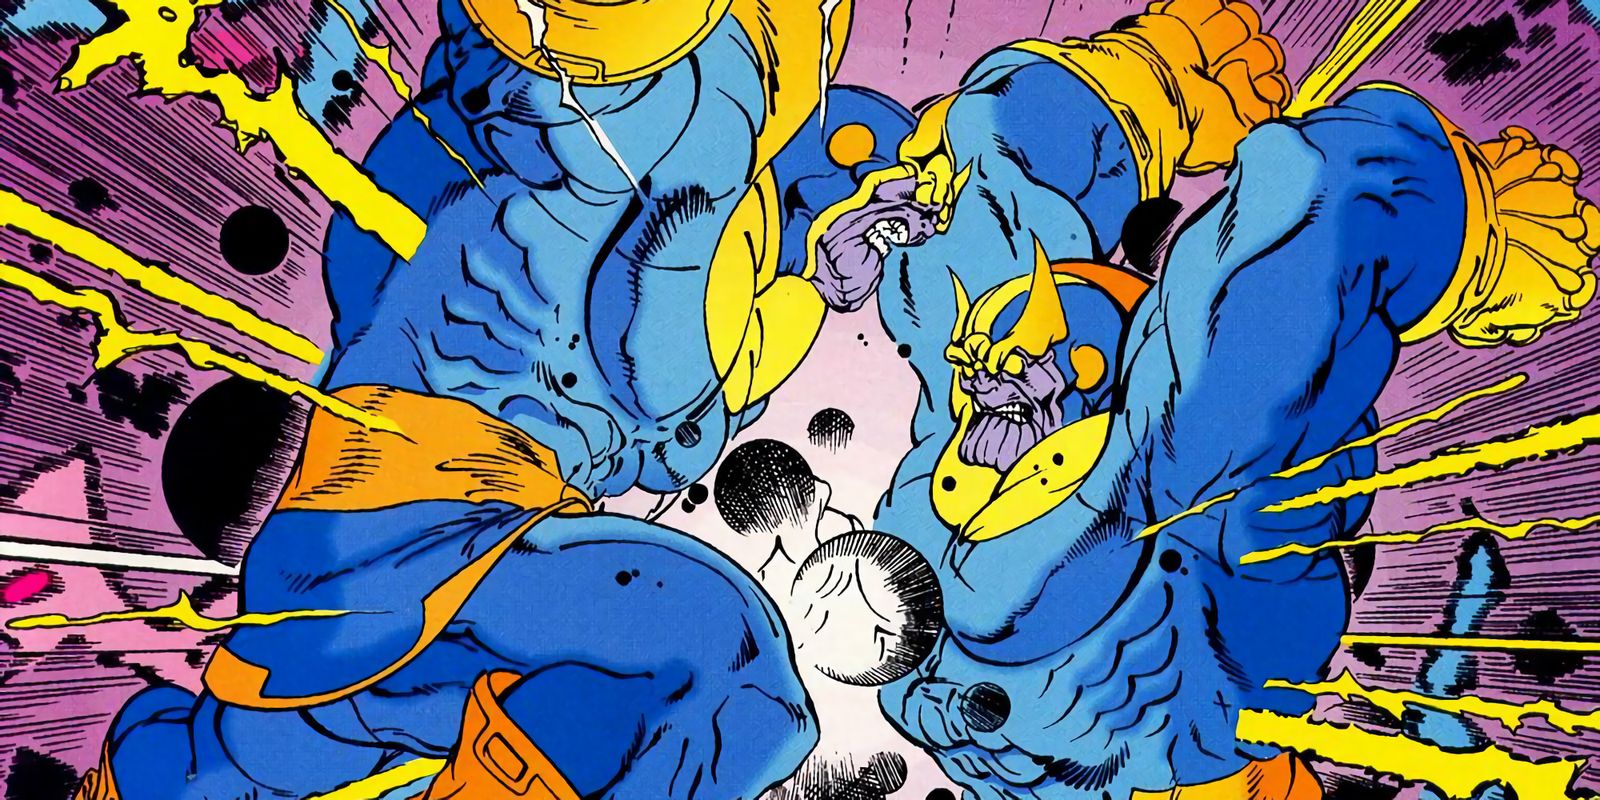 Once Thanos executes his name in the original comics version of the Infinit...